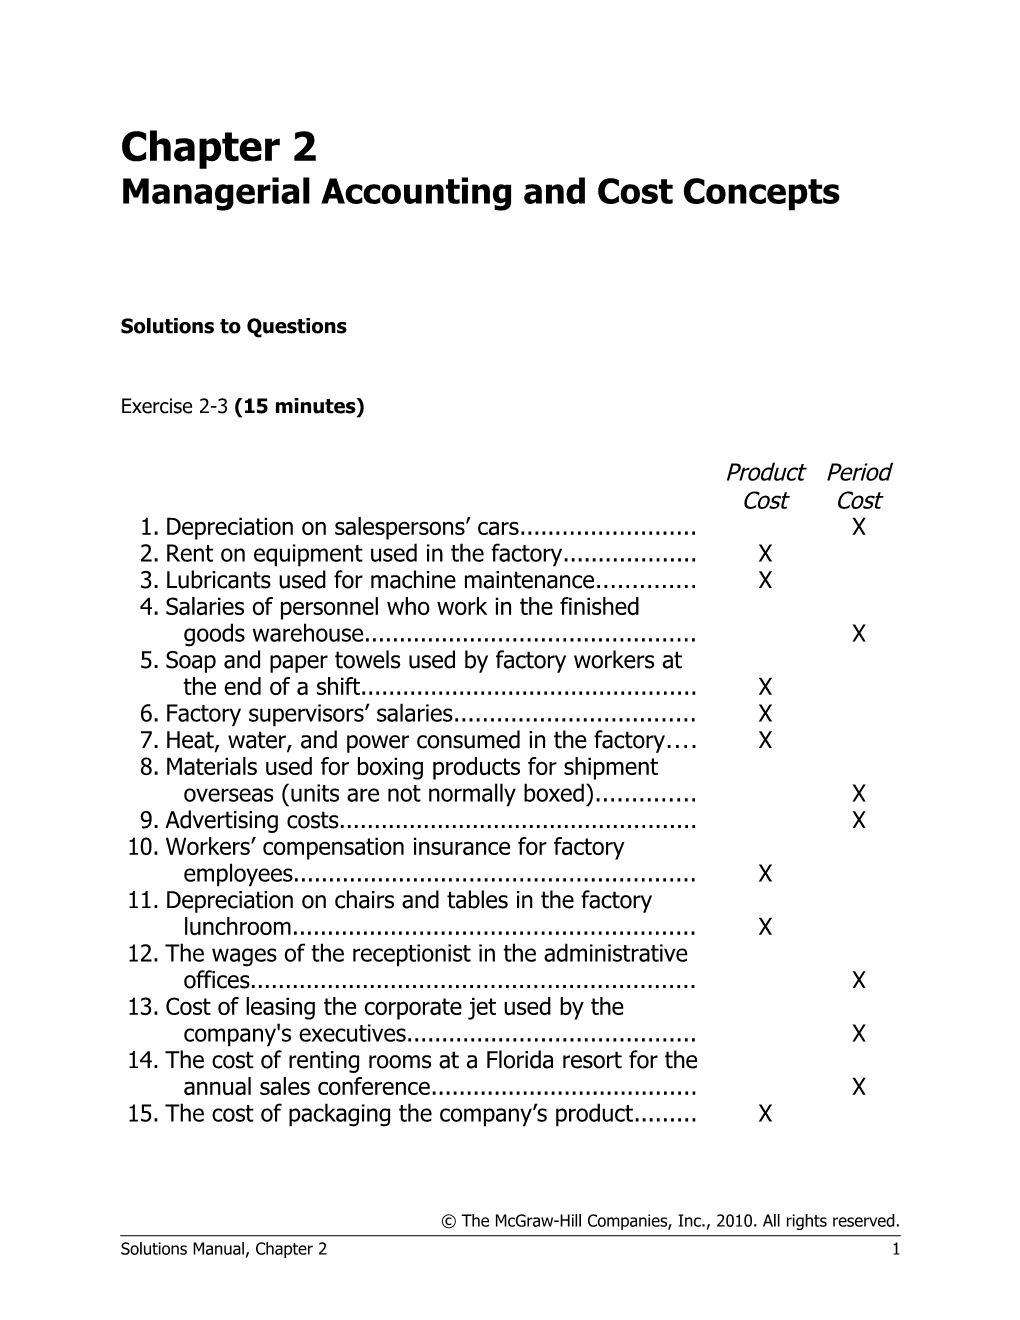 Managerial Accounting and Cost Concepts s2